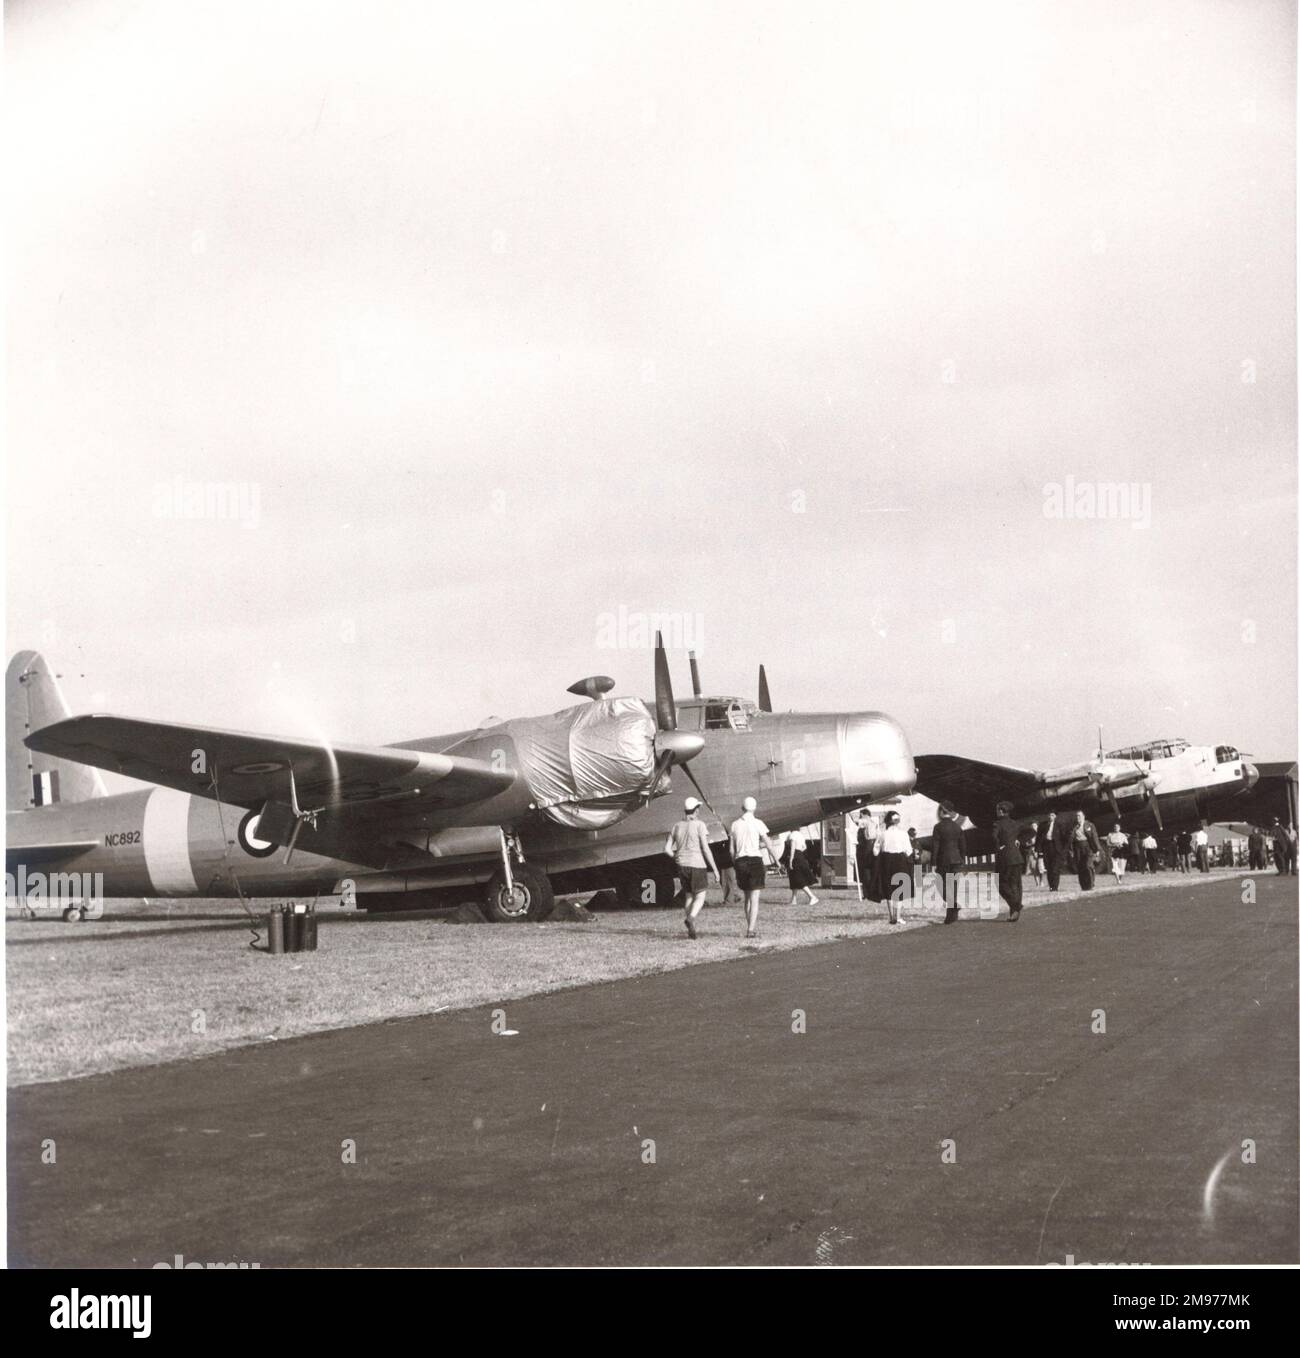 Vickers Wellington TX, NC892 and Avro Lancaster at the 50 years of flying display at Hendon in 1951. Stock Photo